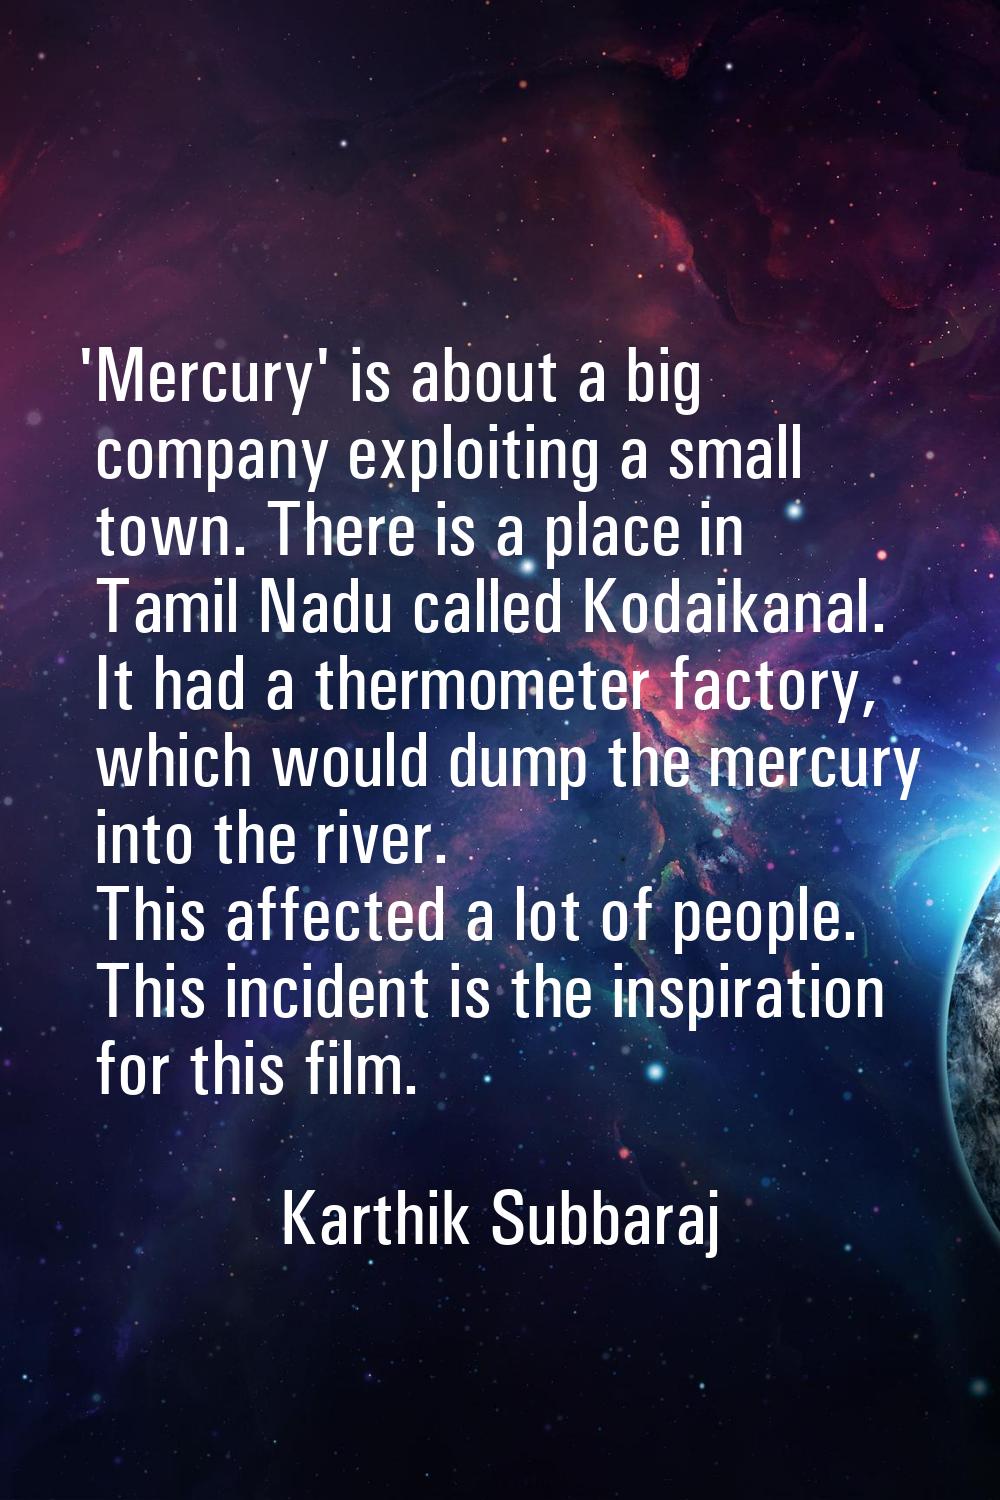 'Mercury' is about a big company exploiting a small town. There is a place in Tamil Nadu called Kod